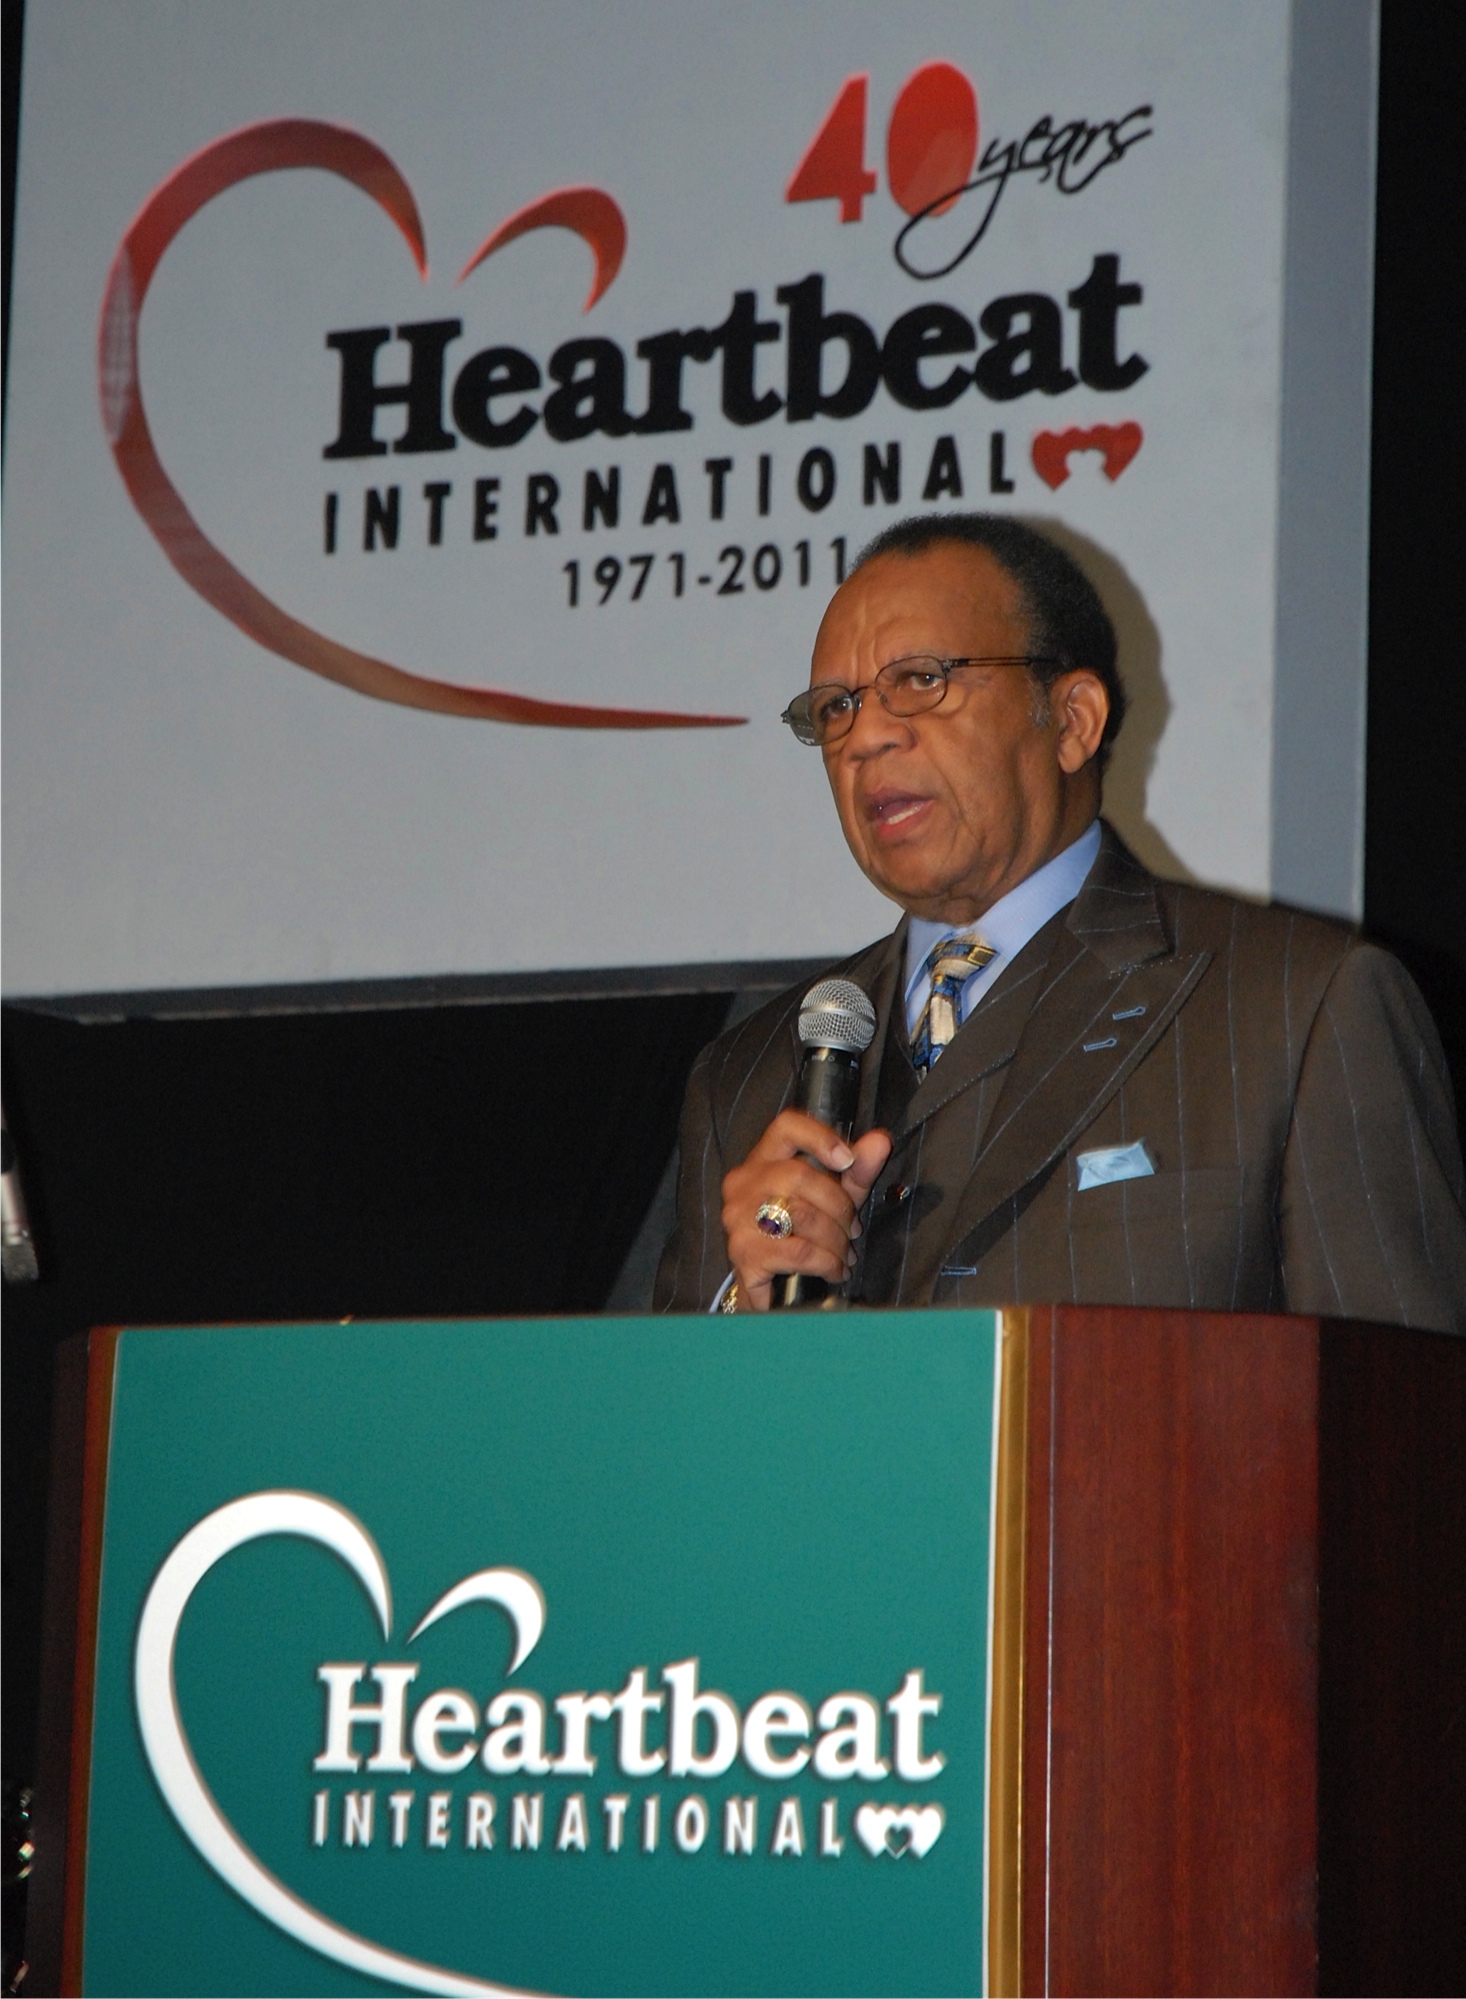 Heartbeat International Conference Marks 40th Anniversary